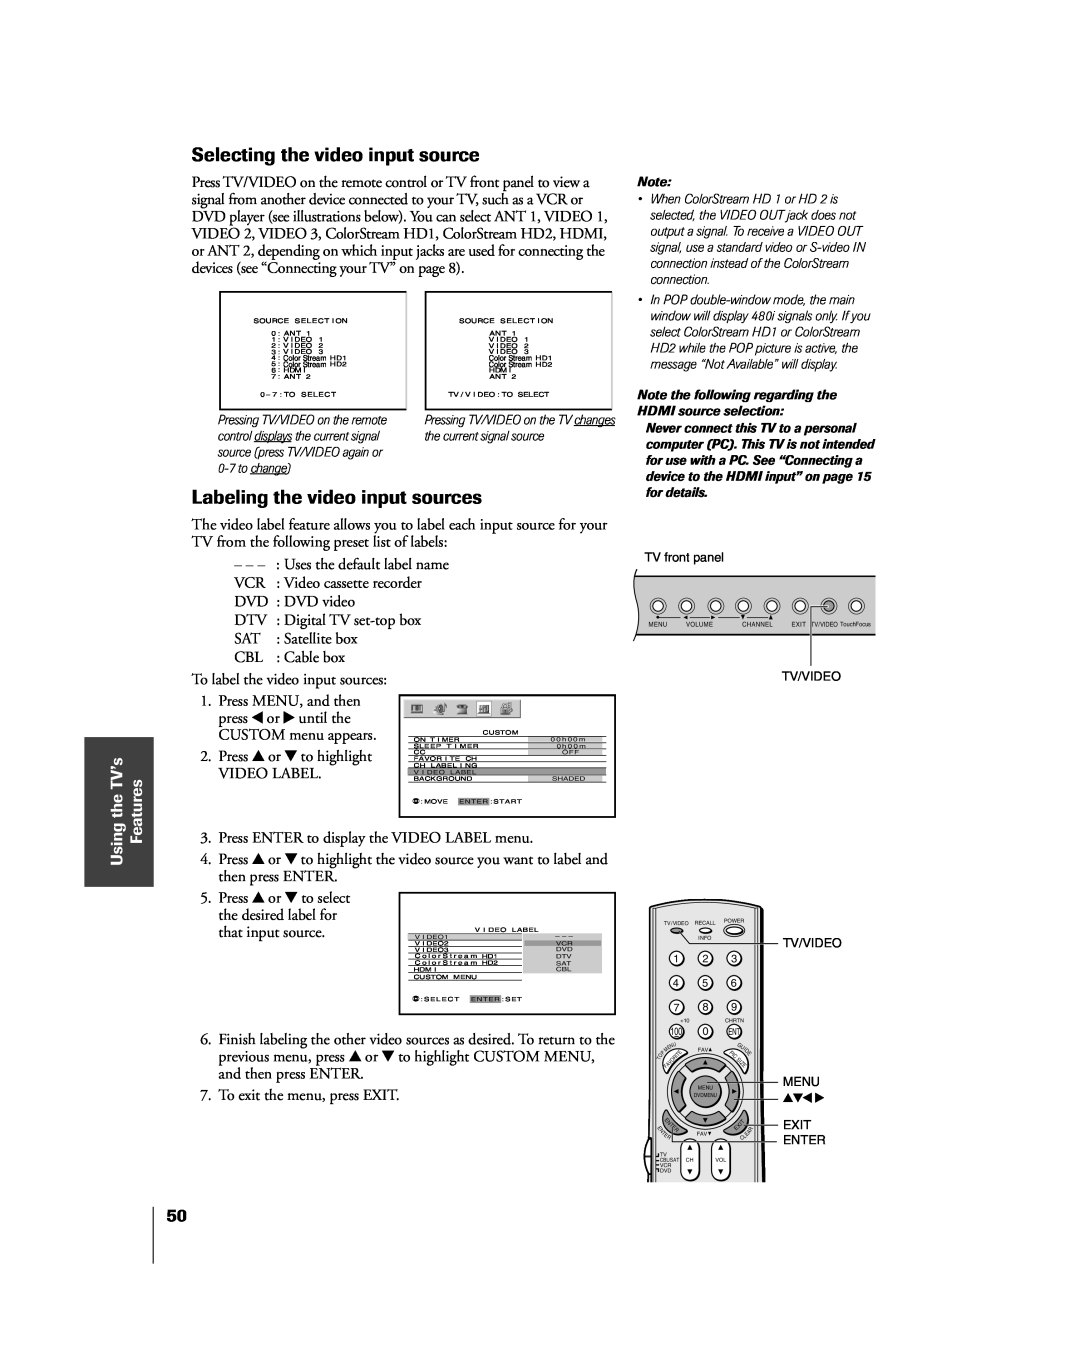 Toshiba 57H85C, 65H85C, 51H85C owner manual Selecting the video input source, previous menu, press, and then press ENTER 